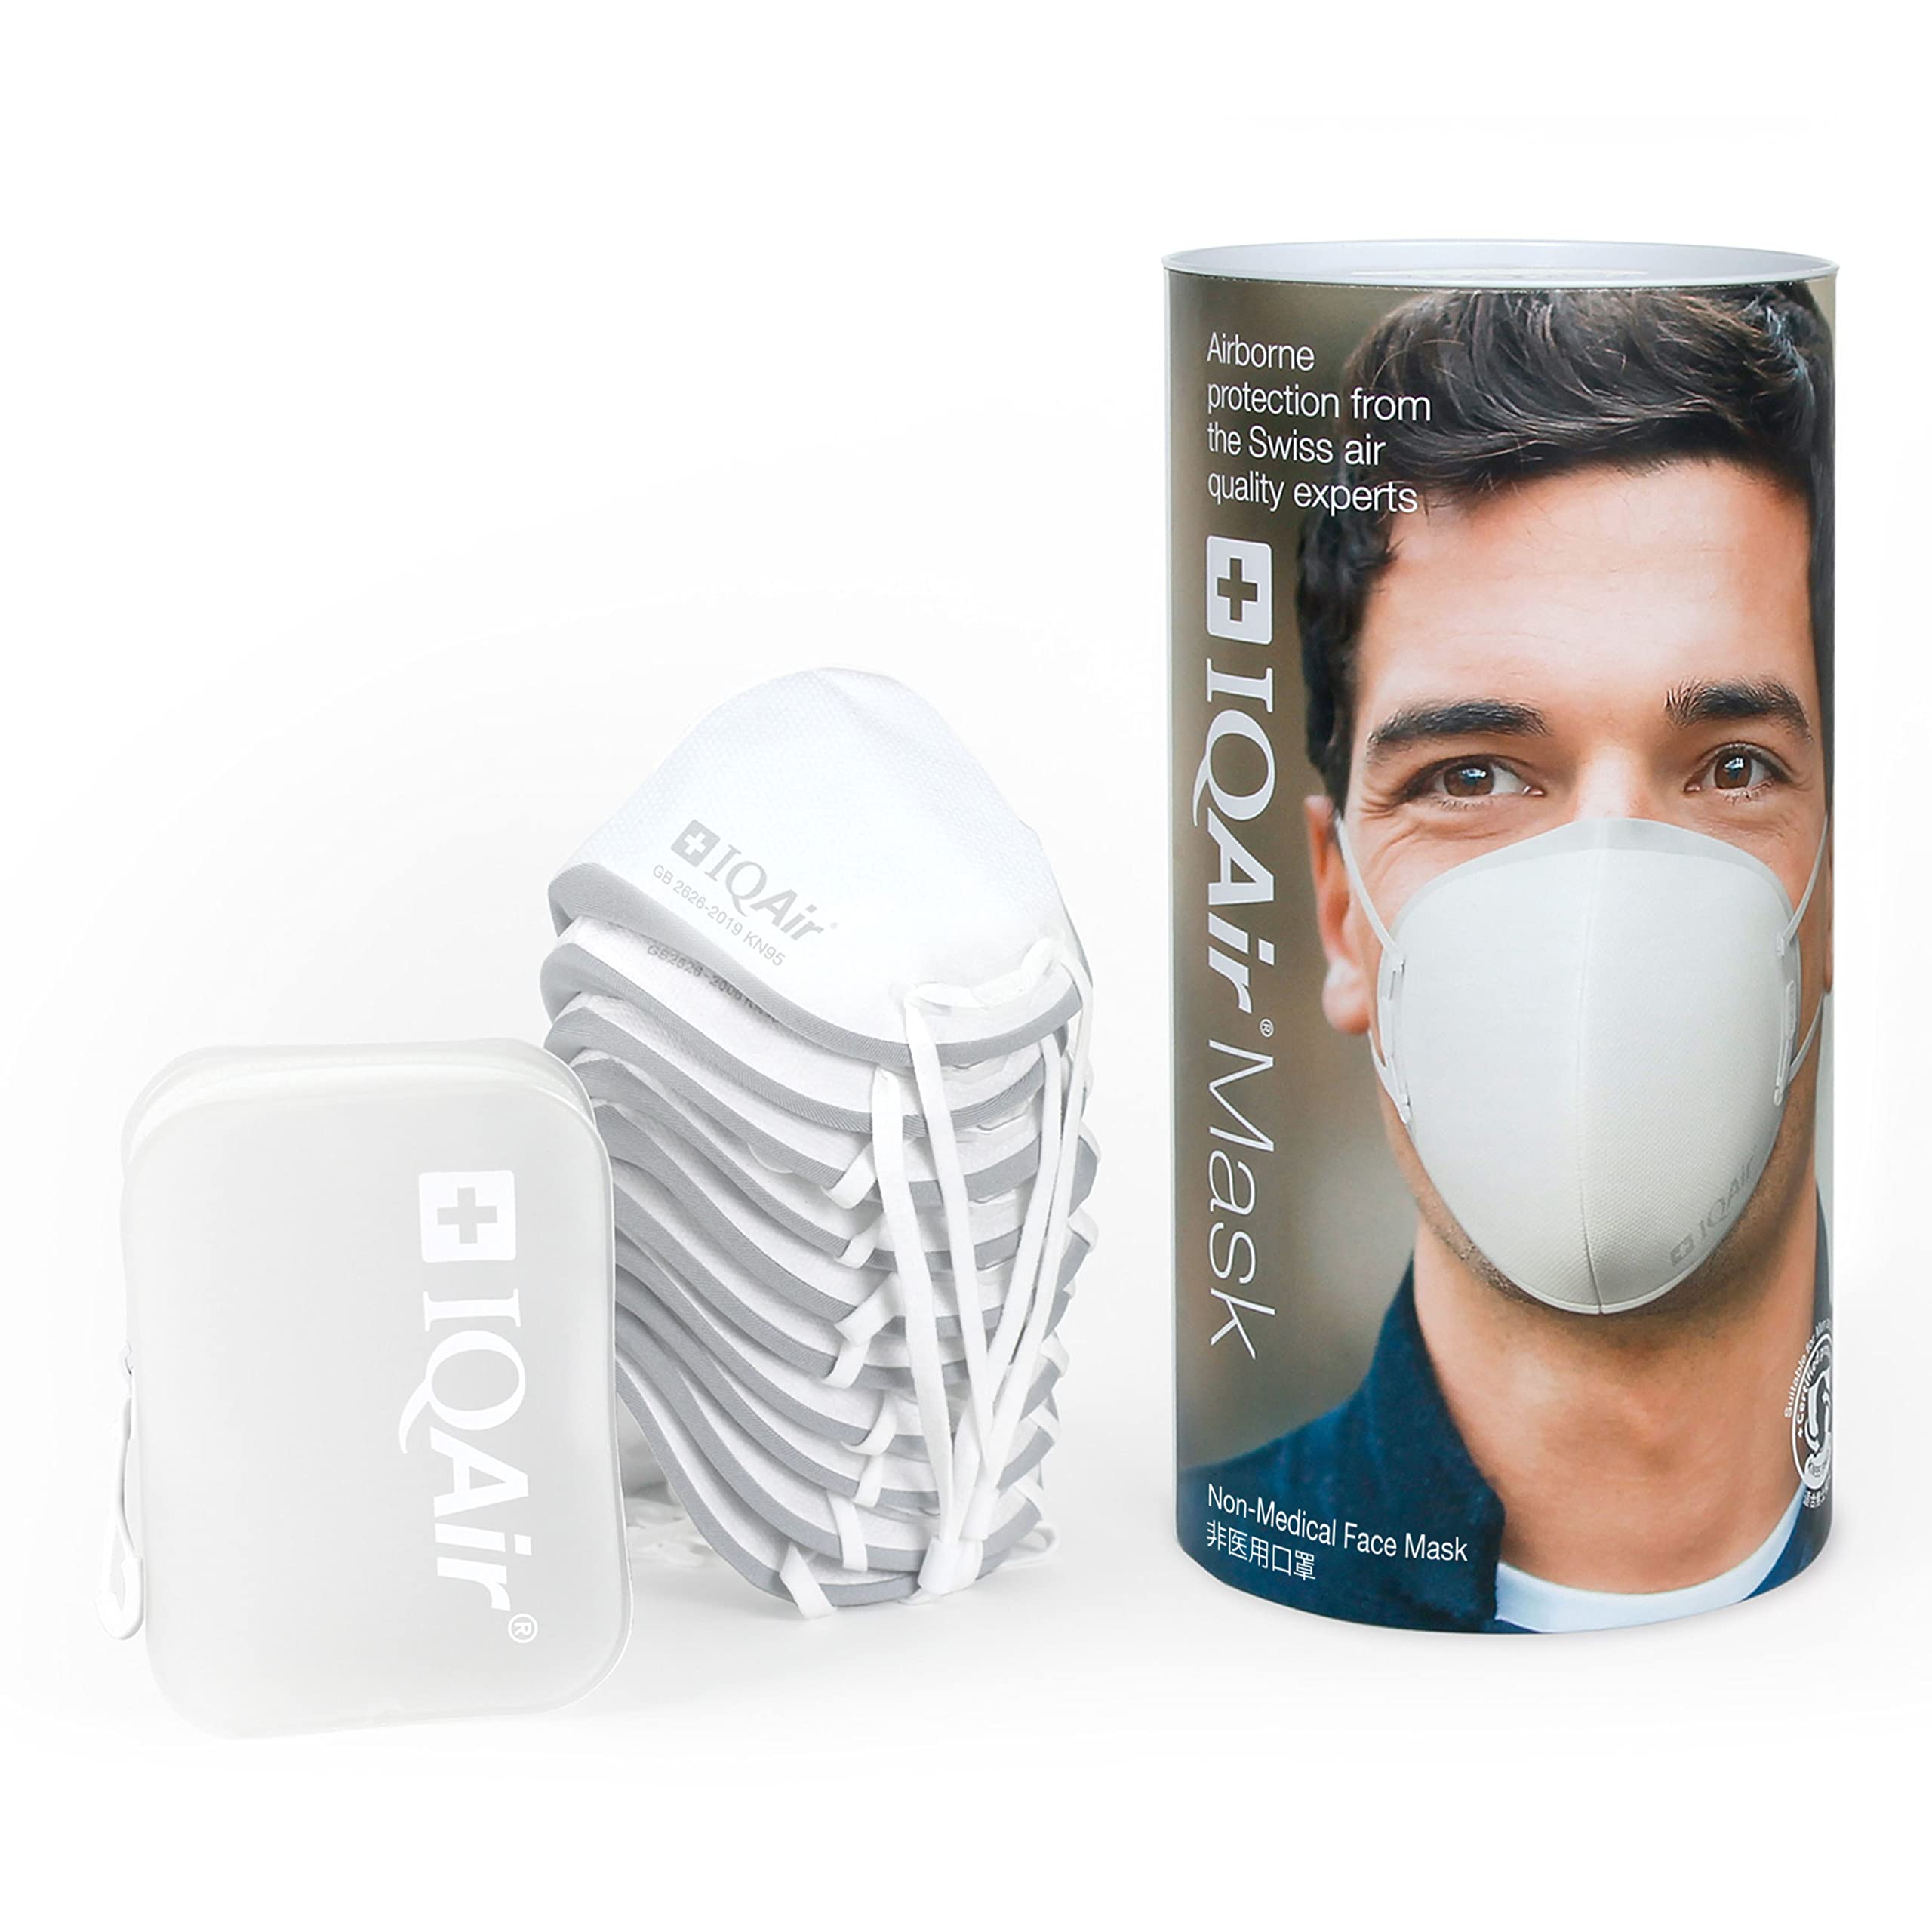 IQAir KN95 Face Mask German-made for Dust, Smoke, and Other Airborne Particles, including PM2.5; Large – Adult size